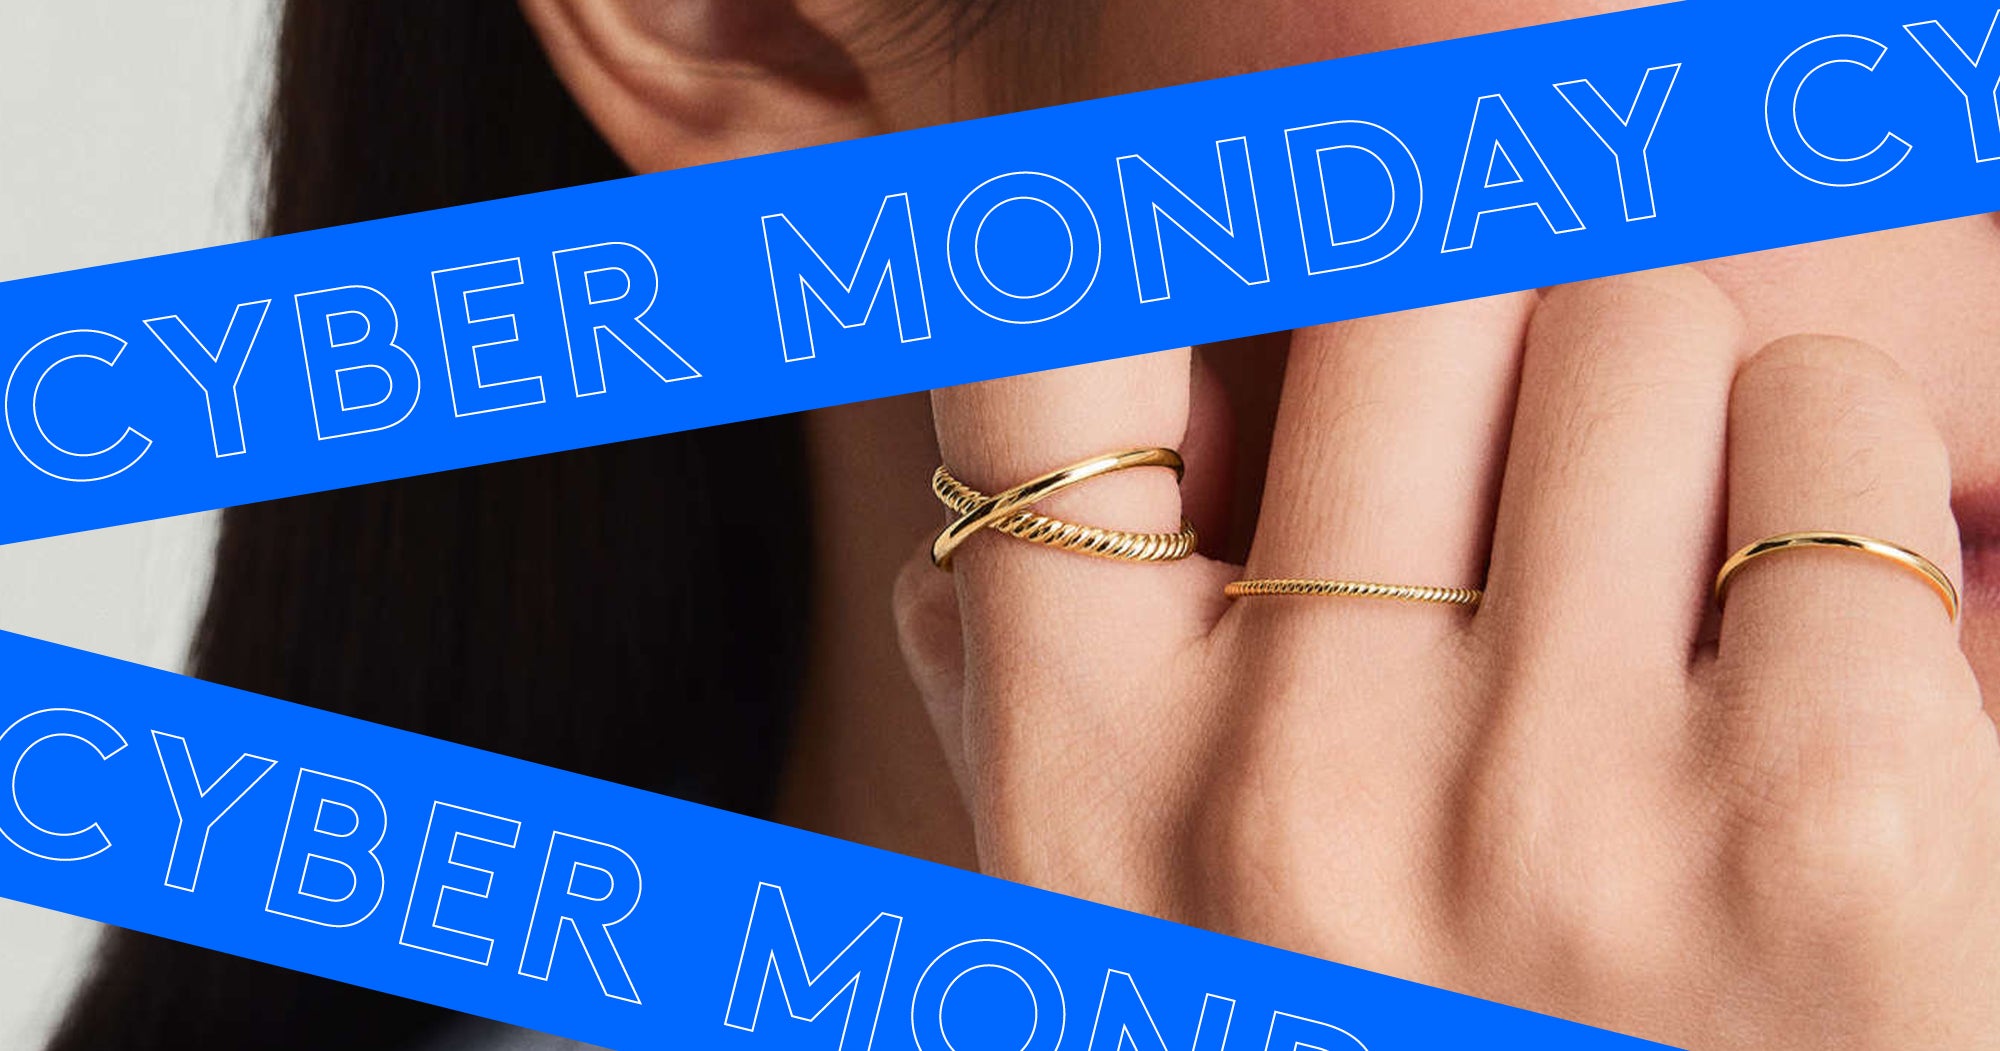 All The Cyber Monday Deals You Still Have Time To Shop thumbnail